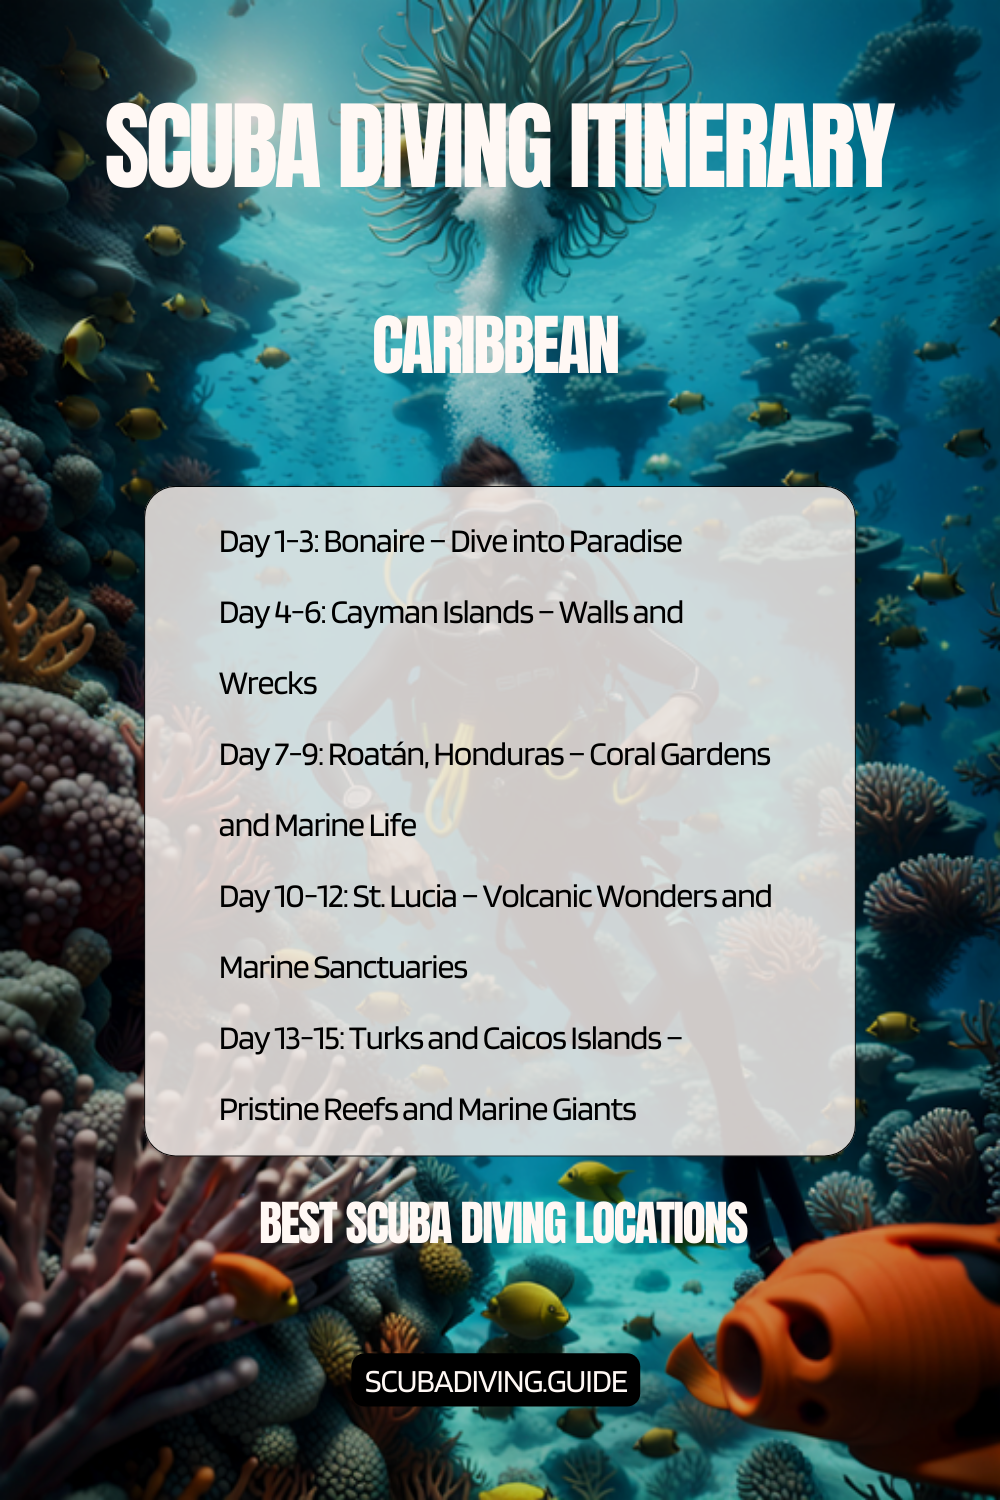 Caribbean Recommended Scuba Diving Itinerary